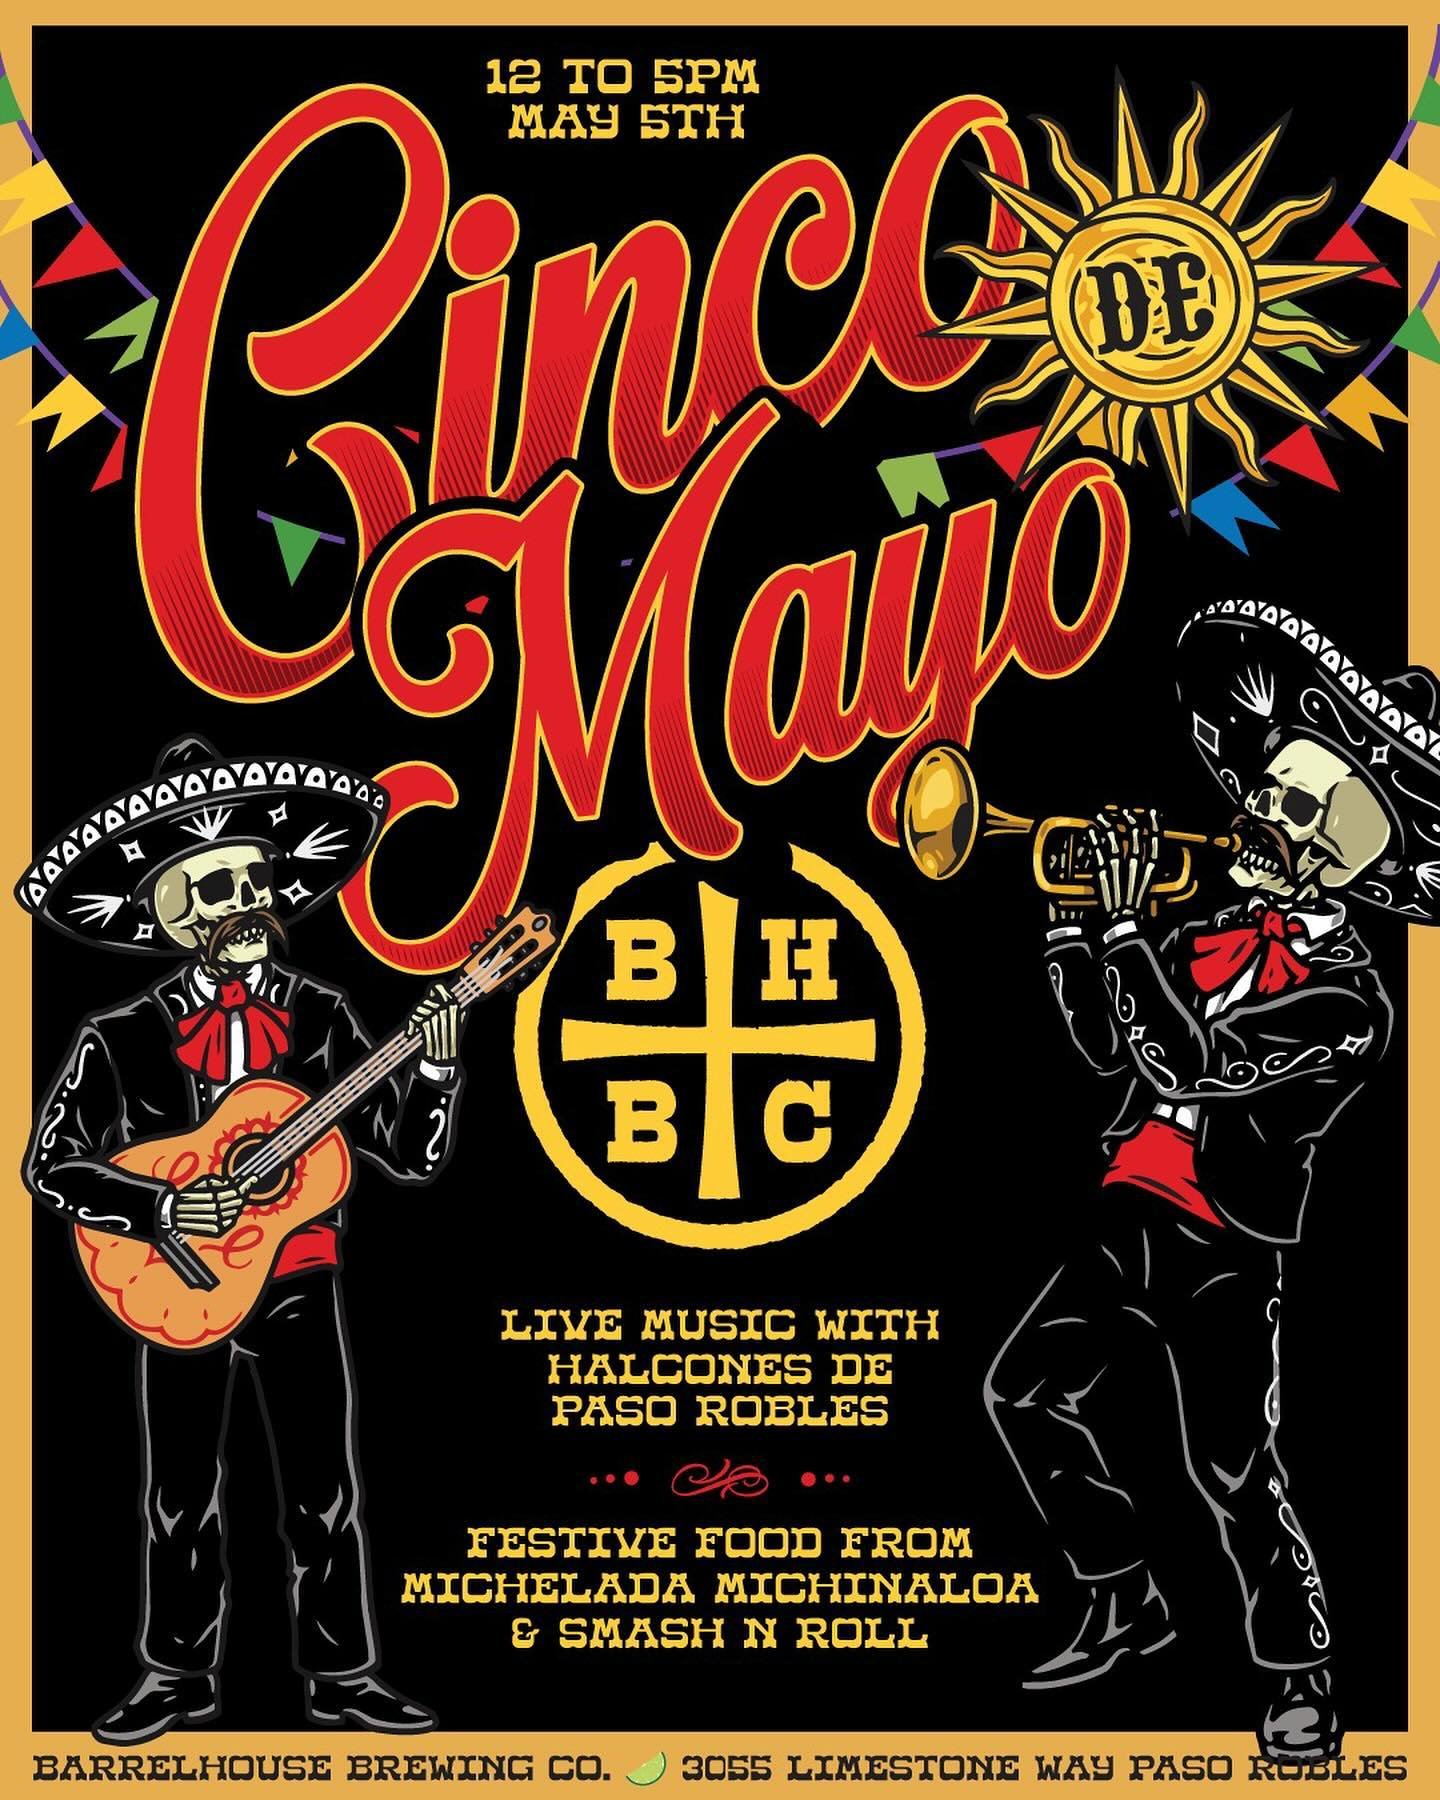 Cinco De Mayo is here, and the party&rsquo;s at BarrelHouse Brewing Co!

Join us until 5 PM for a fiesta filled with live music by Halcones de Paso Robles, mouthwatering Quesabirria Tacos, Carne Asada Tacos, Ceviche, Micheladas, and Vampiros from Mic